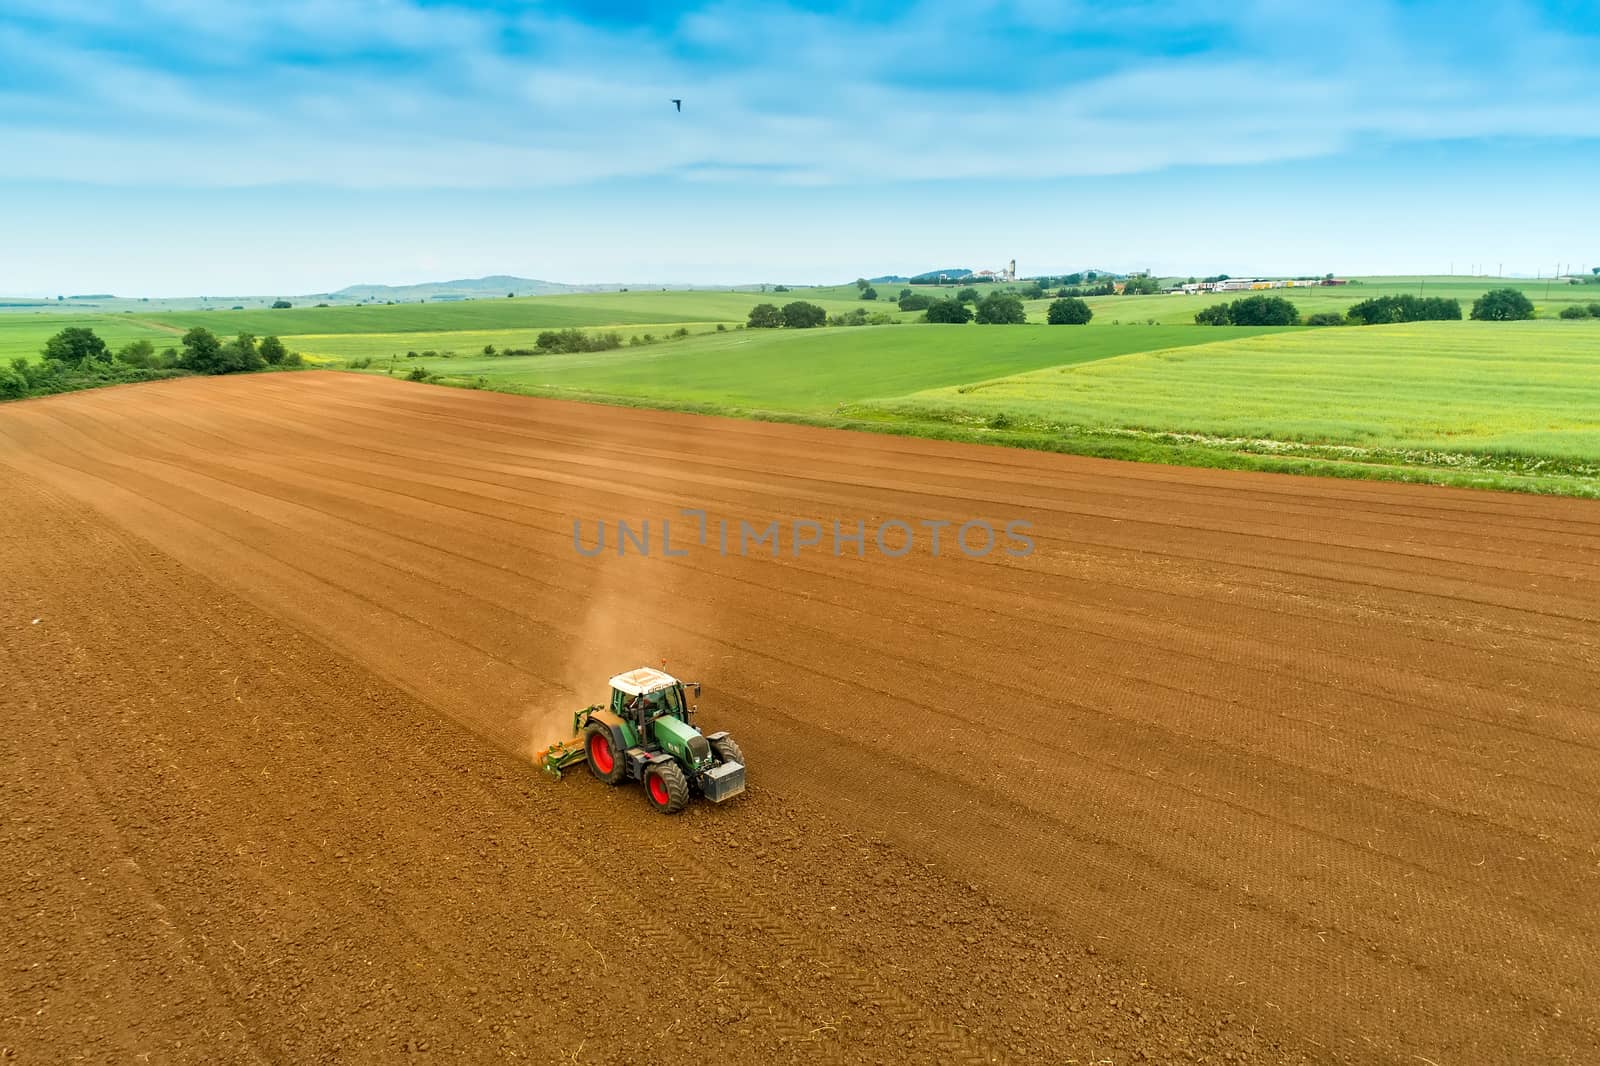 Aerial shot of  Farmer with a tractor on the agricultural field  by ververidis